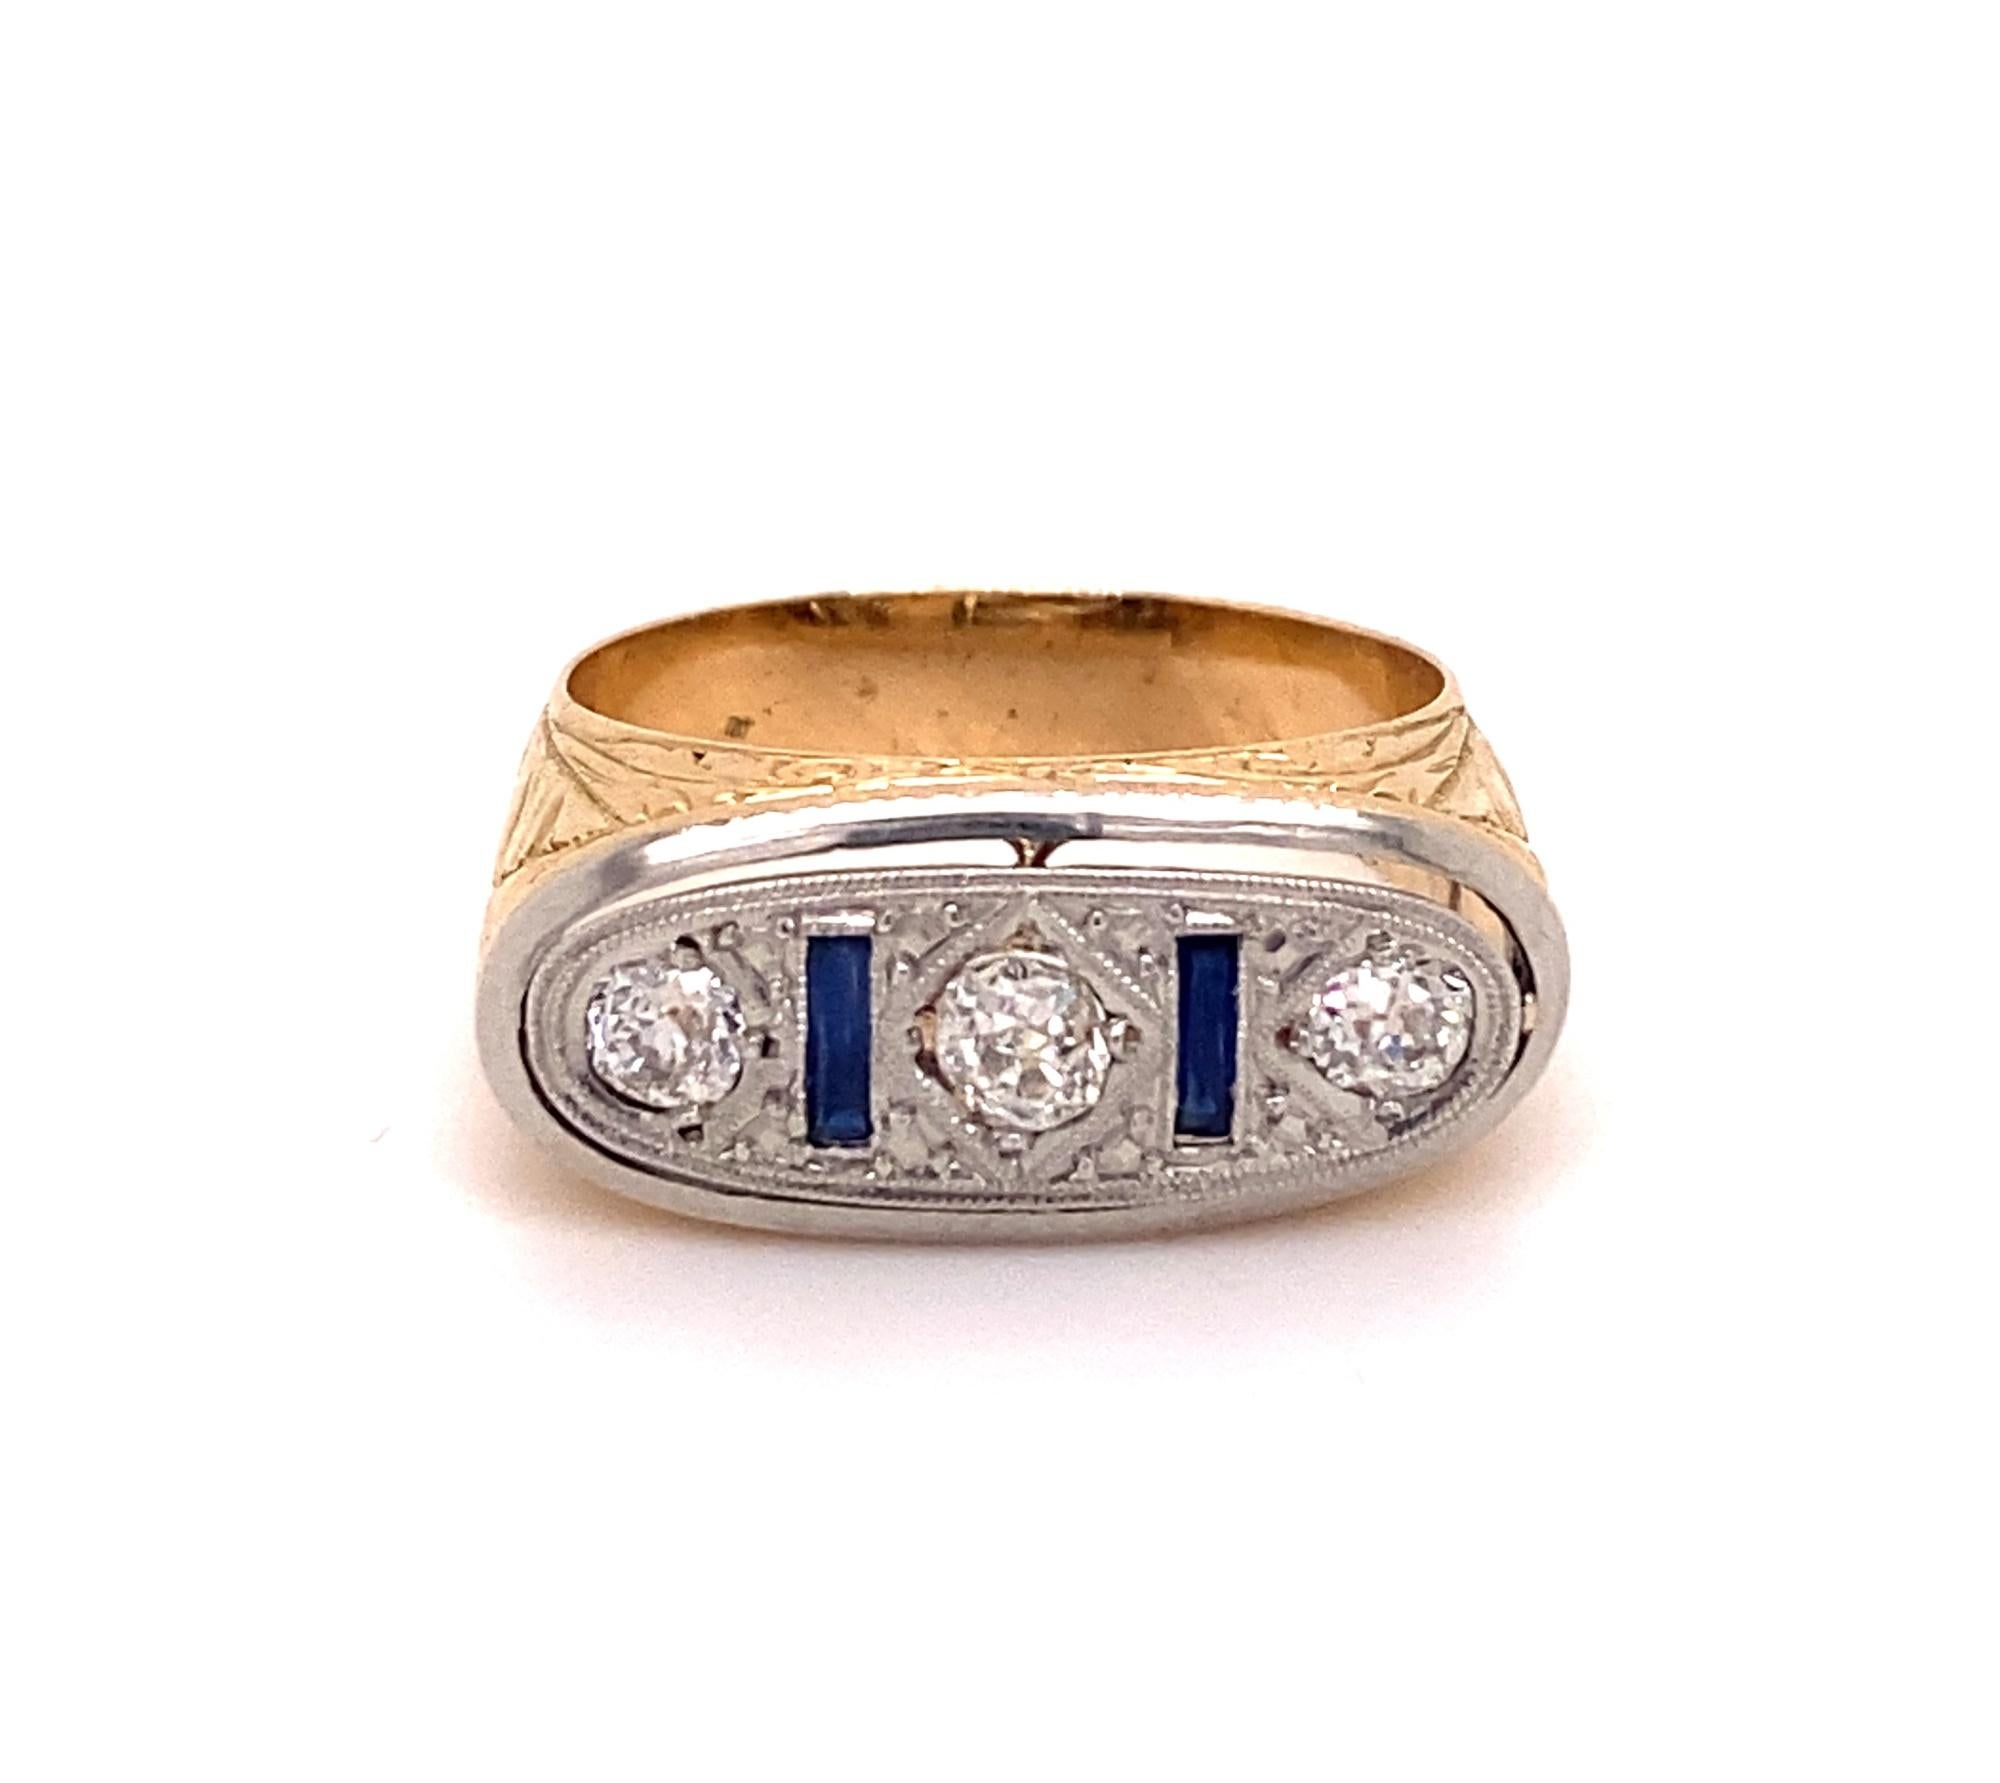 This is a beautiful original art deco Men's ring with detailed foliate designs. The ring is set with three old mine cut diamonds and two natural French cut sapphires. Diamonds have a total weight of .55 carats I color SI-1 clarity set in platinum.